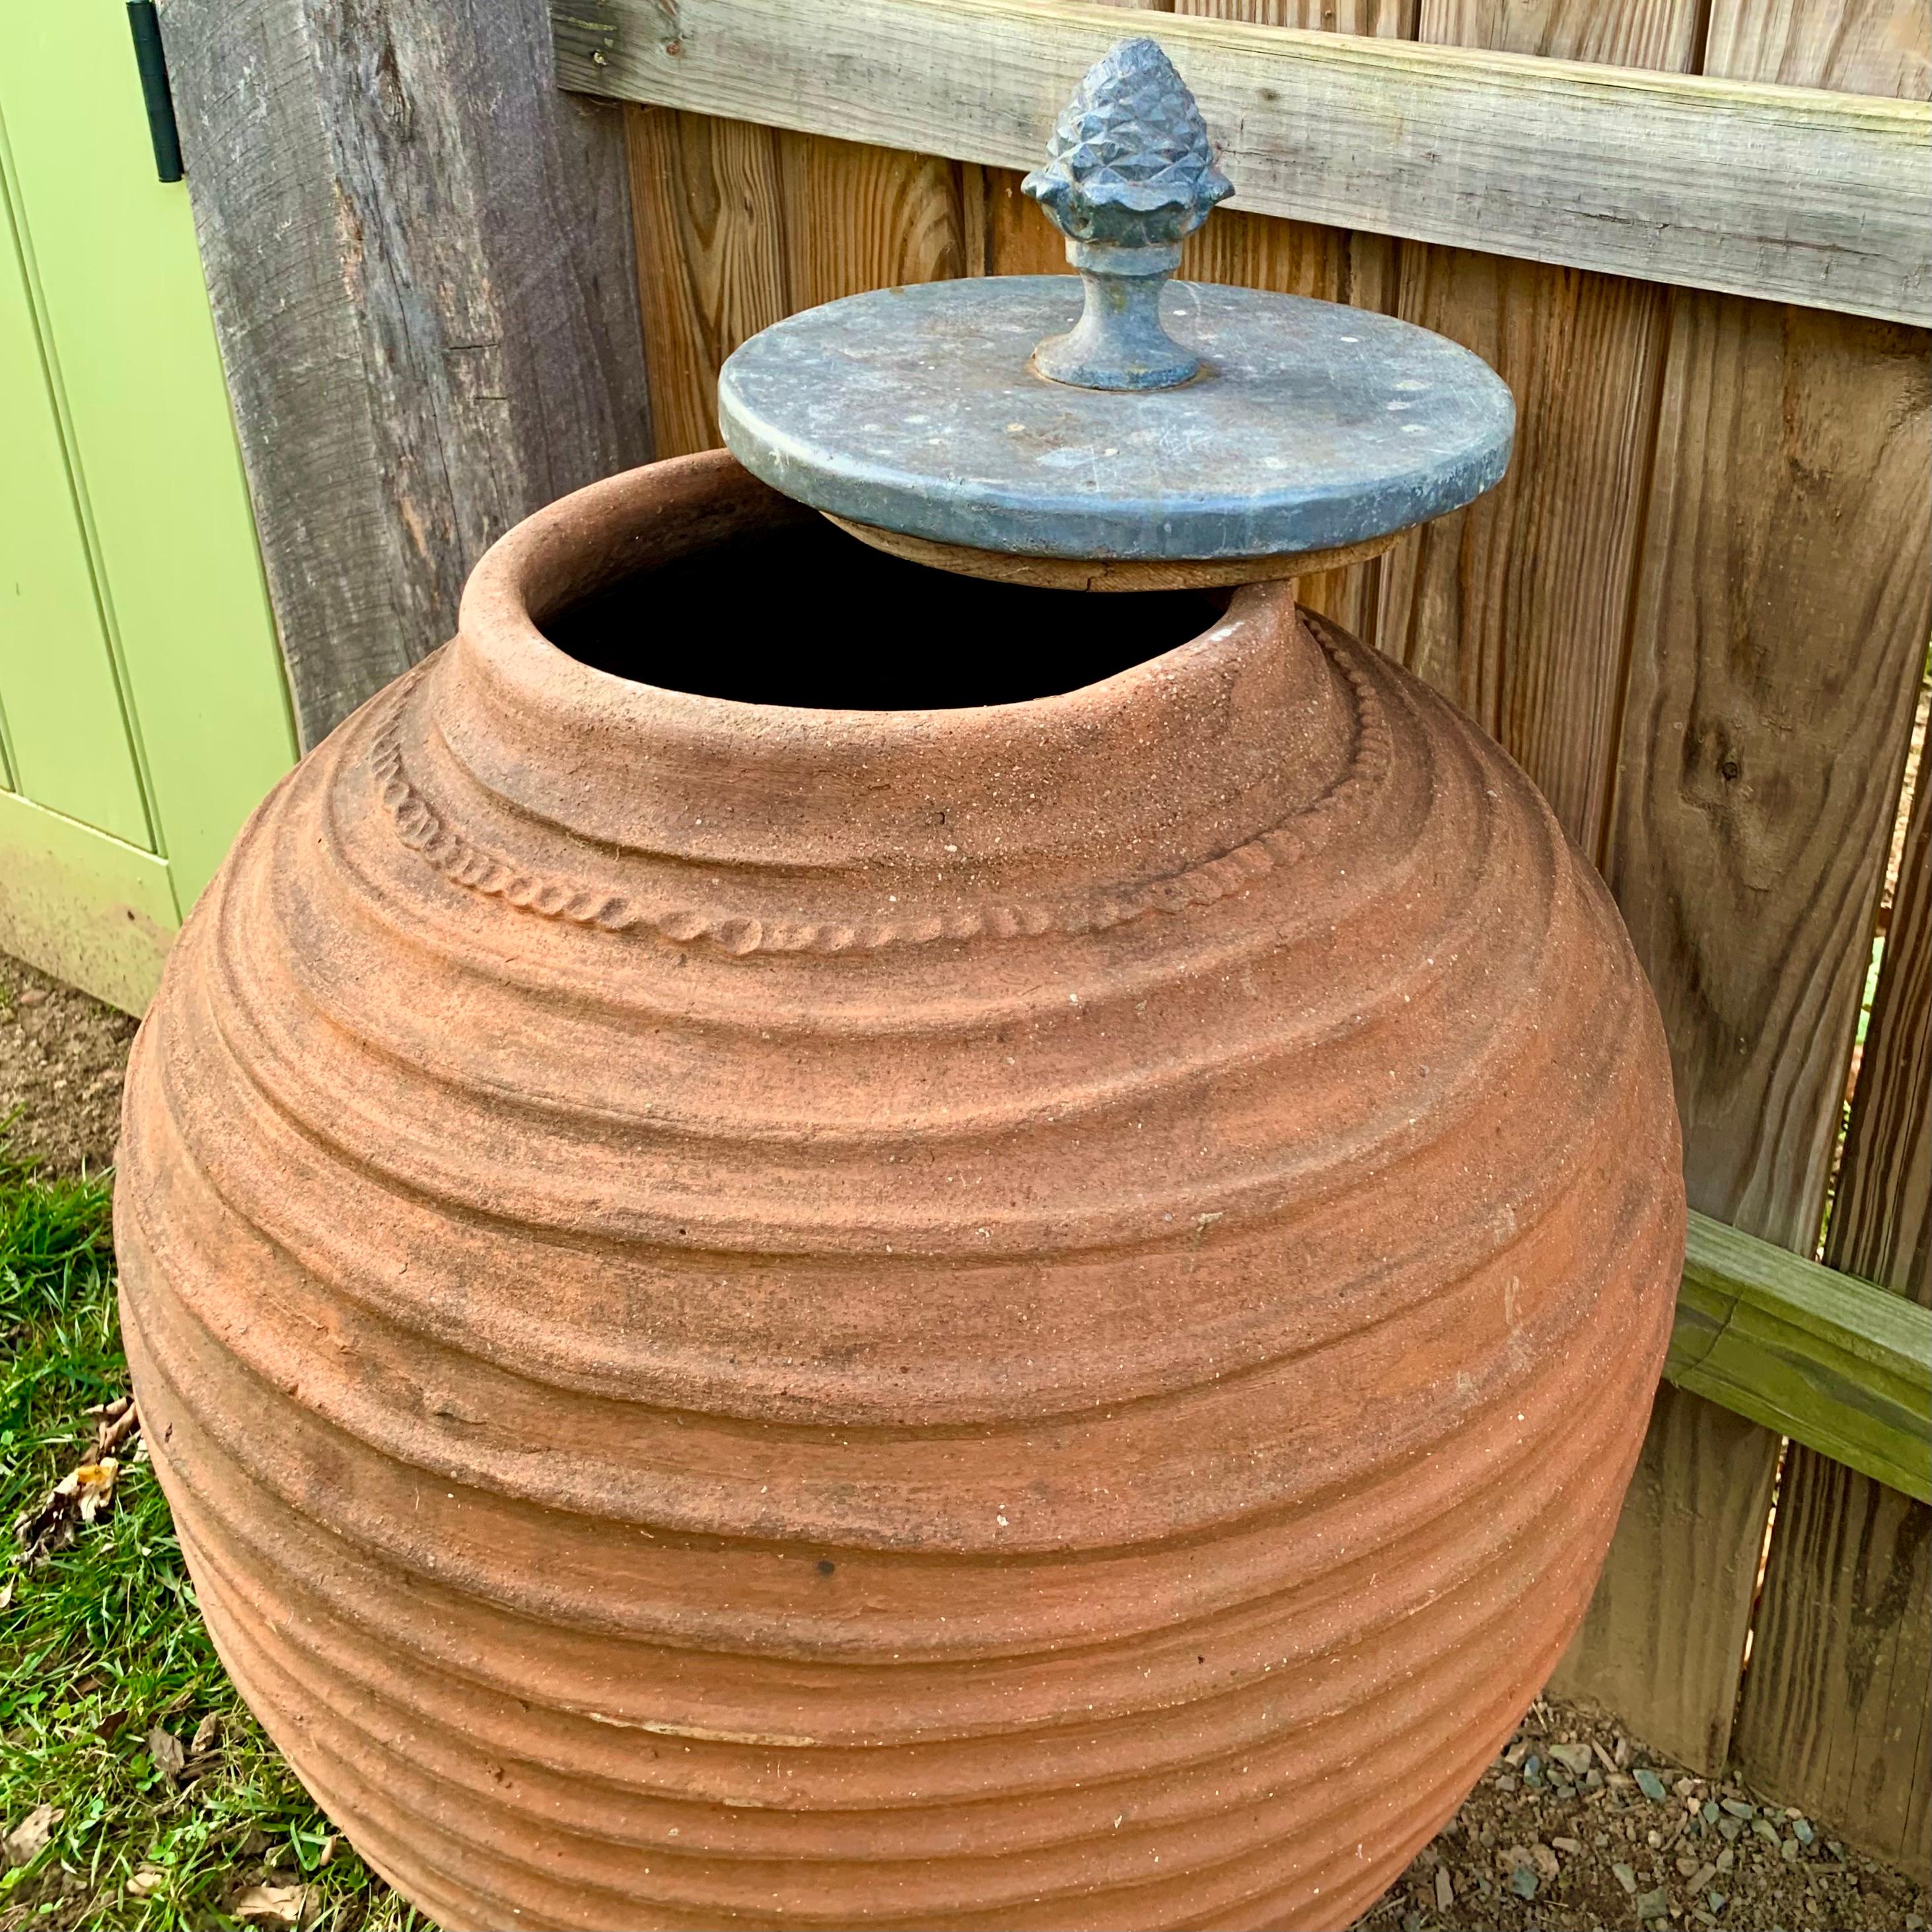 Terracotta Jar Garden Urn With An Ornamental Lead Lid In Good Condition For Sale In Free Union, VA